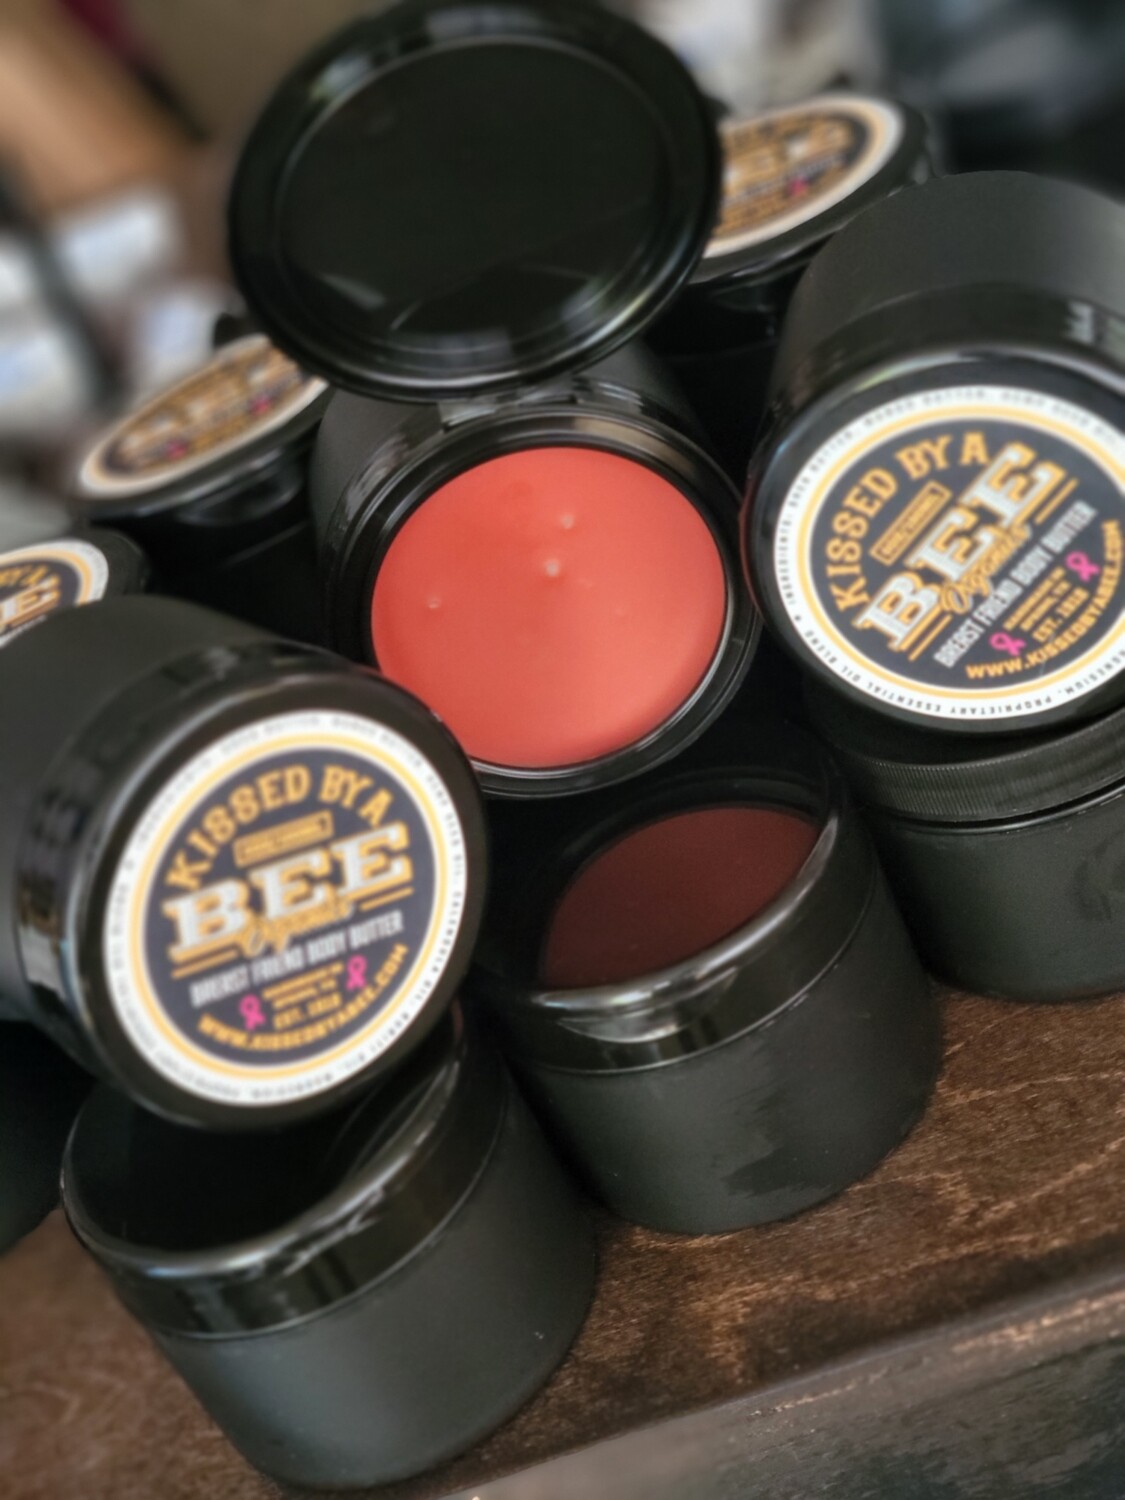 My Breast Friend Body Butter - 8oz ( Limited Edition)